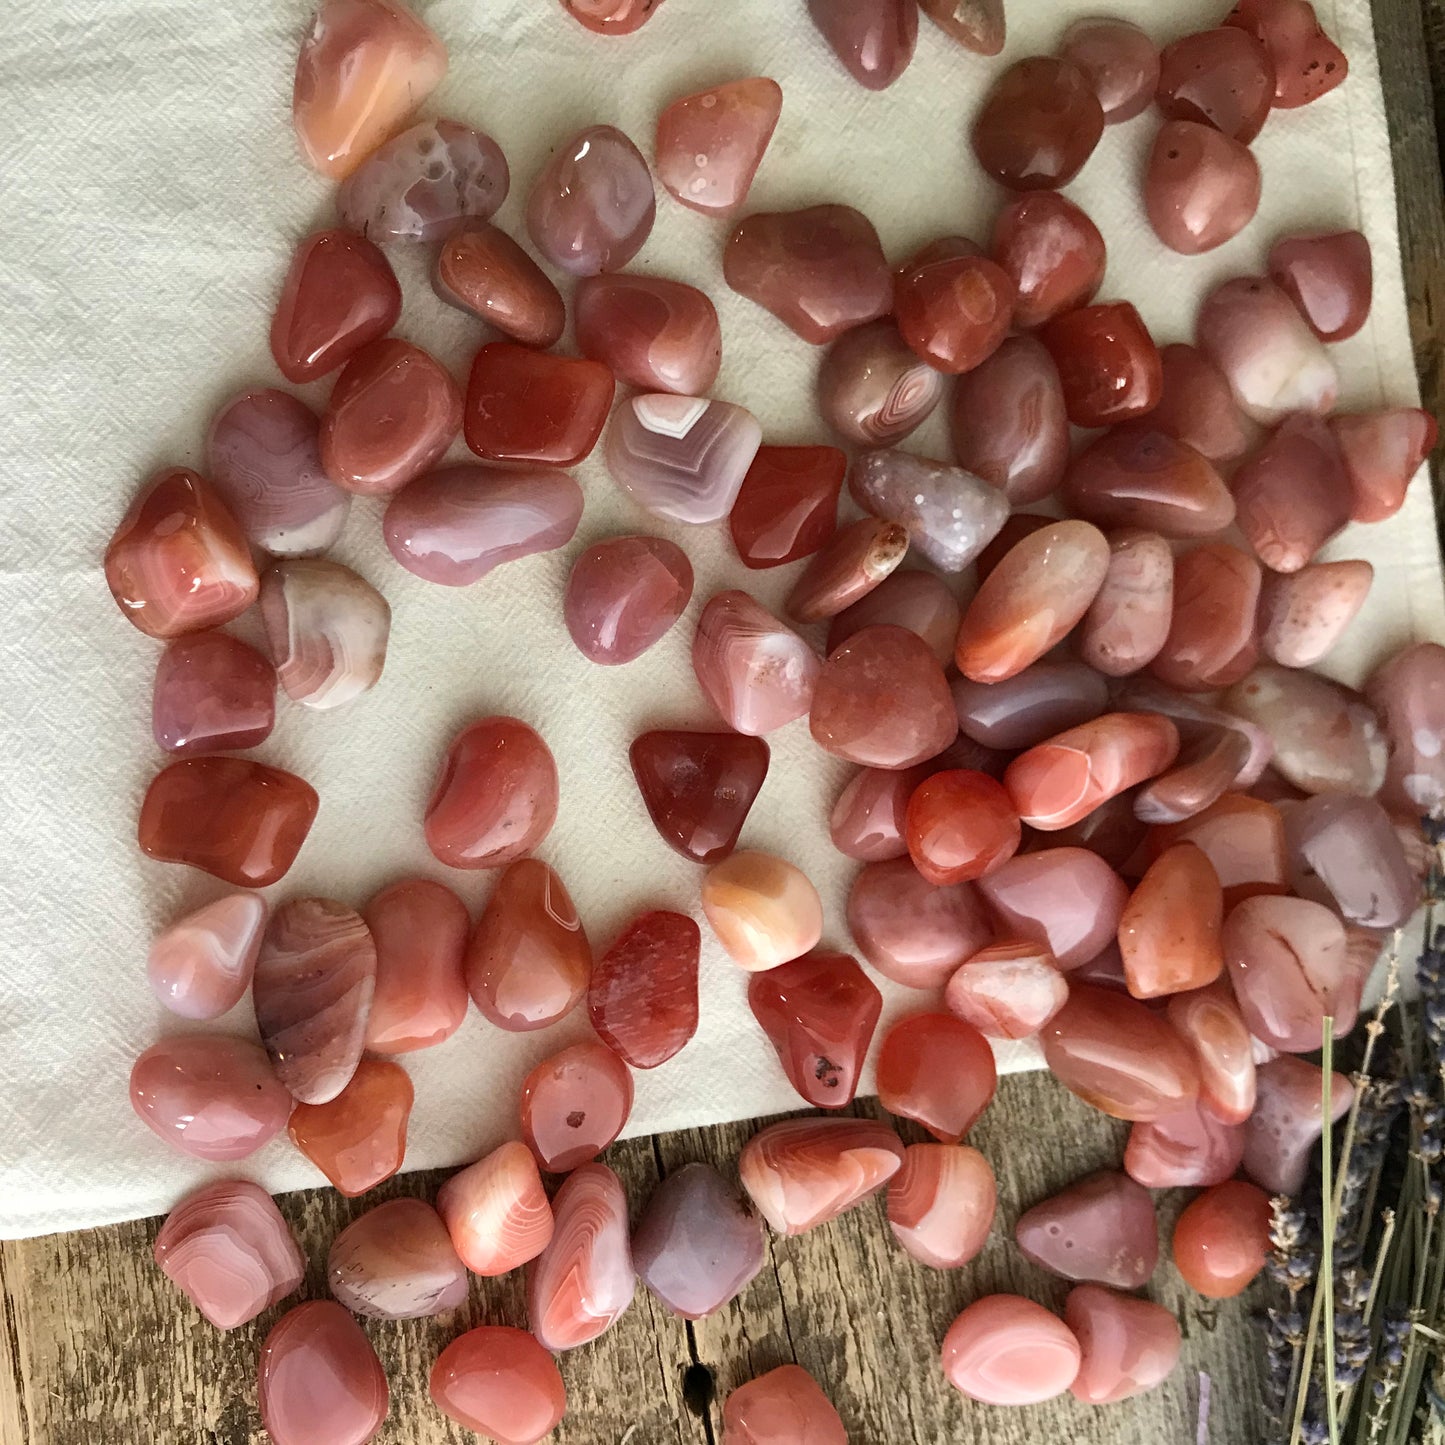 Peach Botzwana Agate Tumbled Polished (Approx 5/8" - 1") Polished Stone for Crystal Grid, Wire Wrapping or Craft Supply BIN-1346